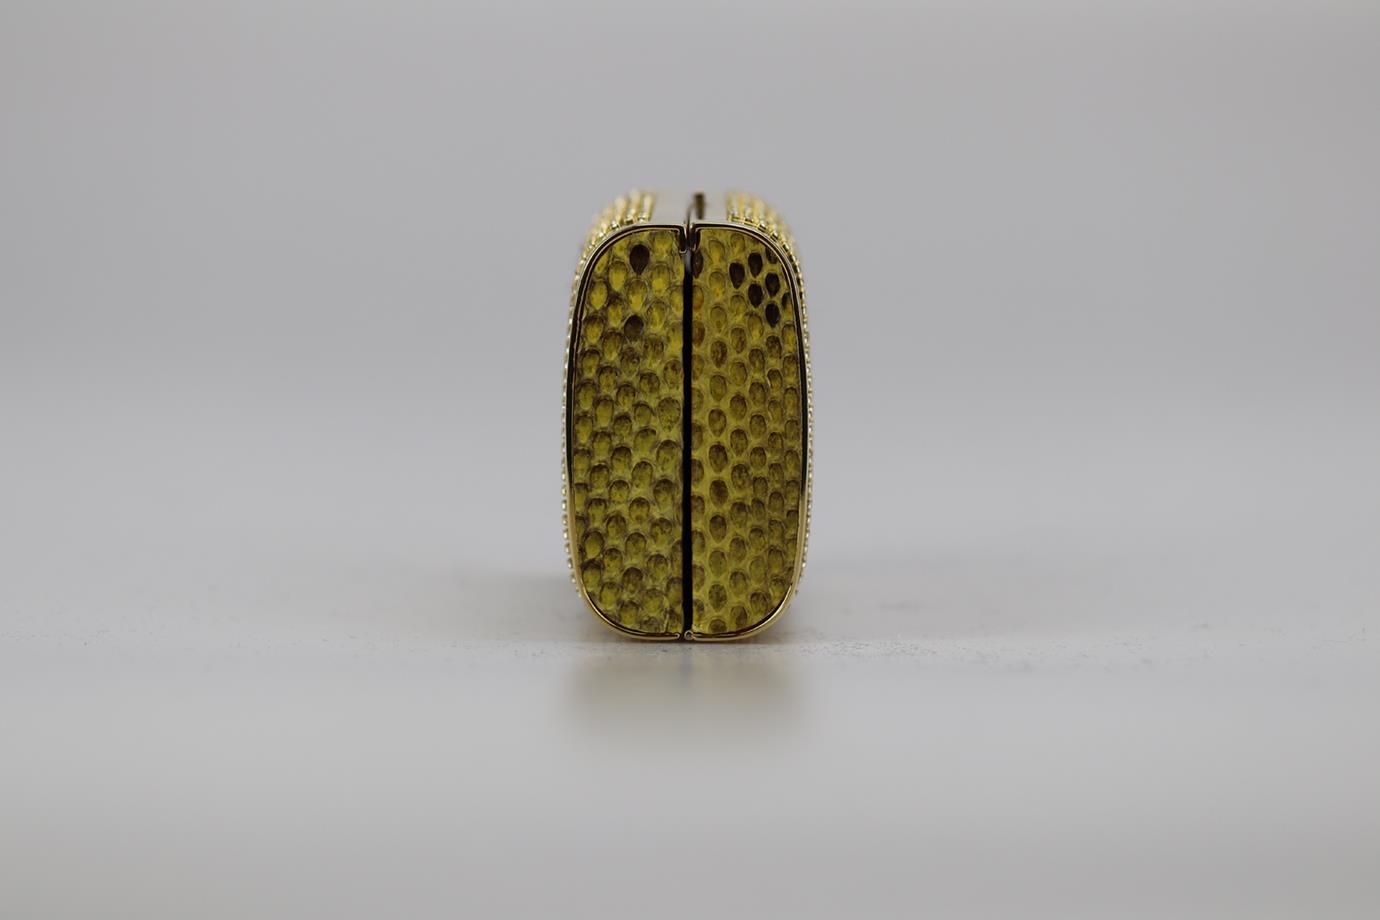 STARK CRYSTAL EMBELLISHED PYTHON AND GOLD TONE CLUTCH